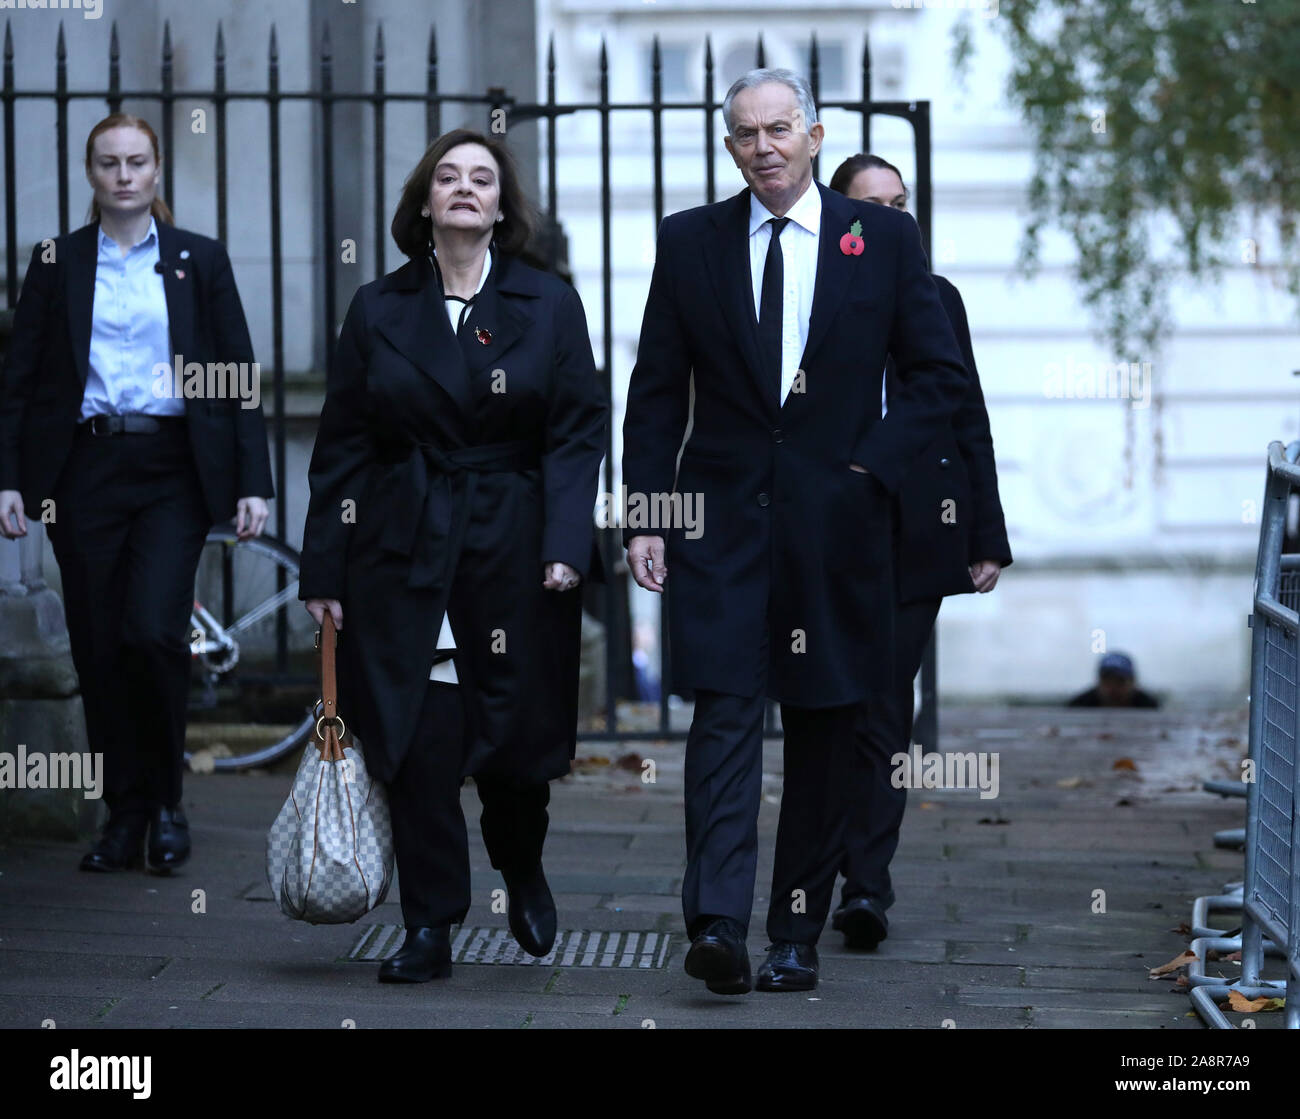 London, UK. 10th Nov, 2019. Former Prime Minister Tony Blair, and wife Cherie arrive in Downing Street on the way to the Remembrance Sunday ceremony at the Cenotaph in Whitehall. Remembrance Sunday, London, on November 10, 2019. Credit: Paul Marriott/Alamy Live News Stock Photo